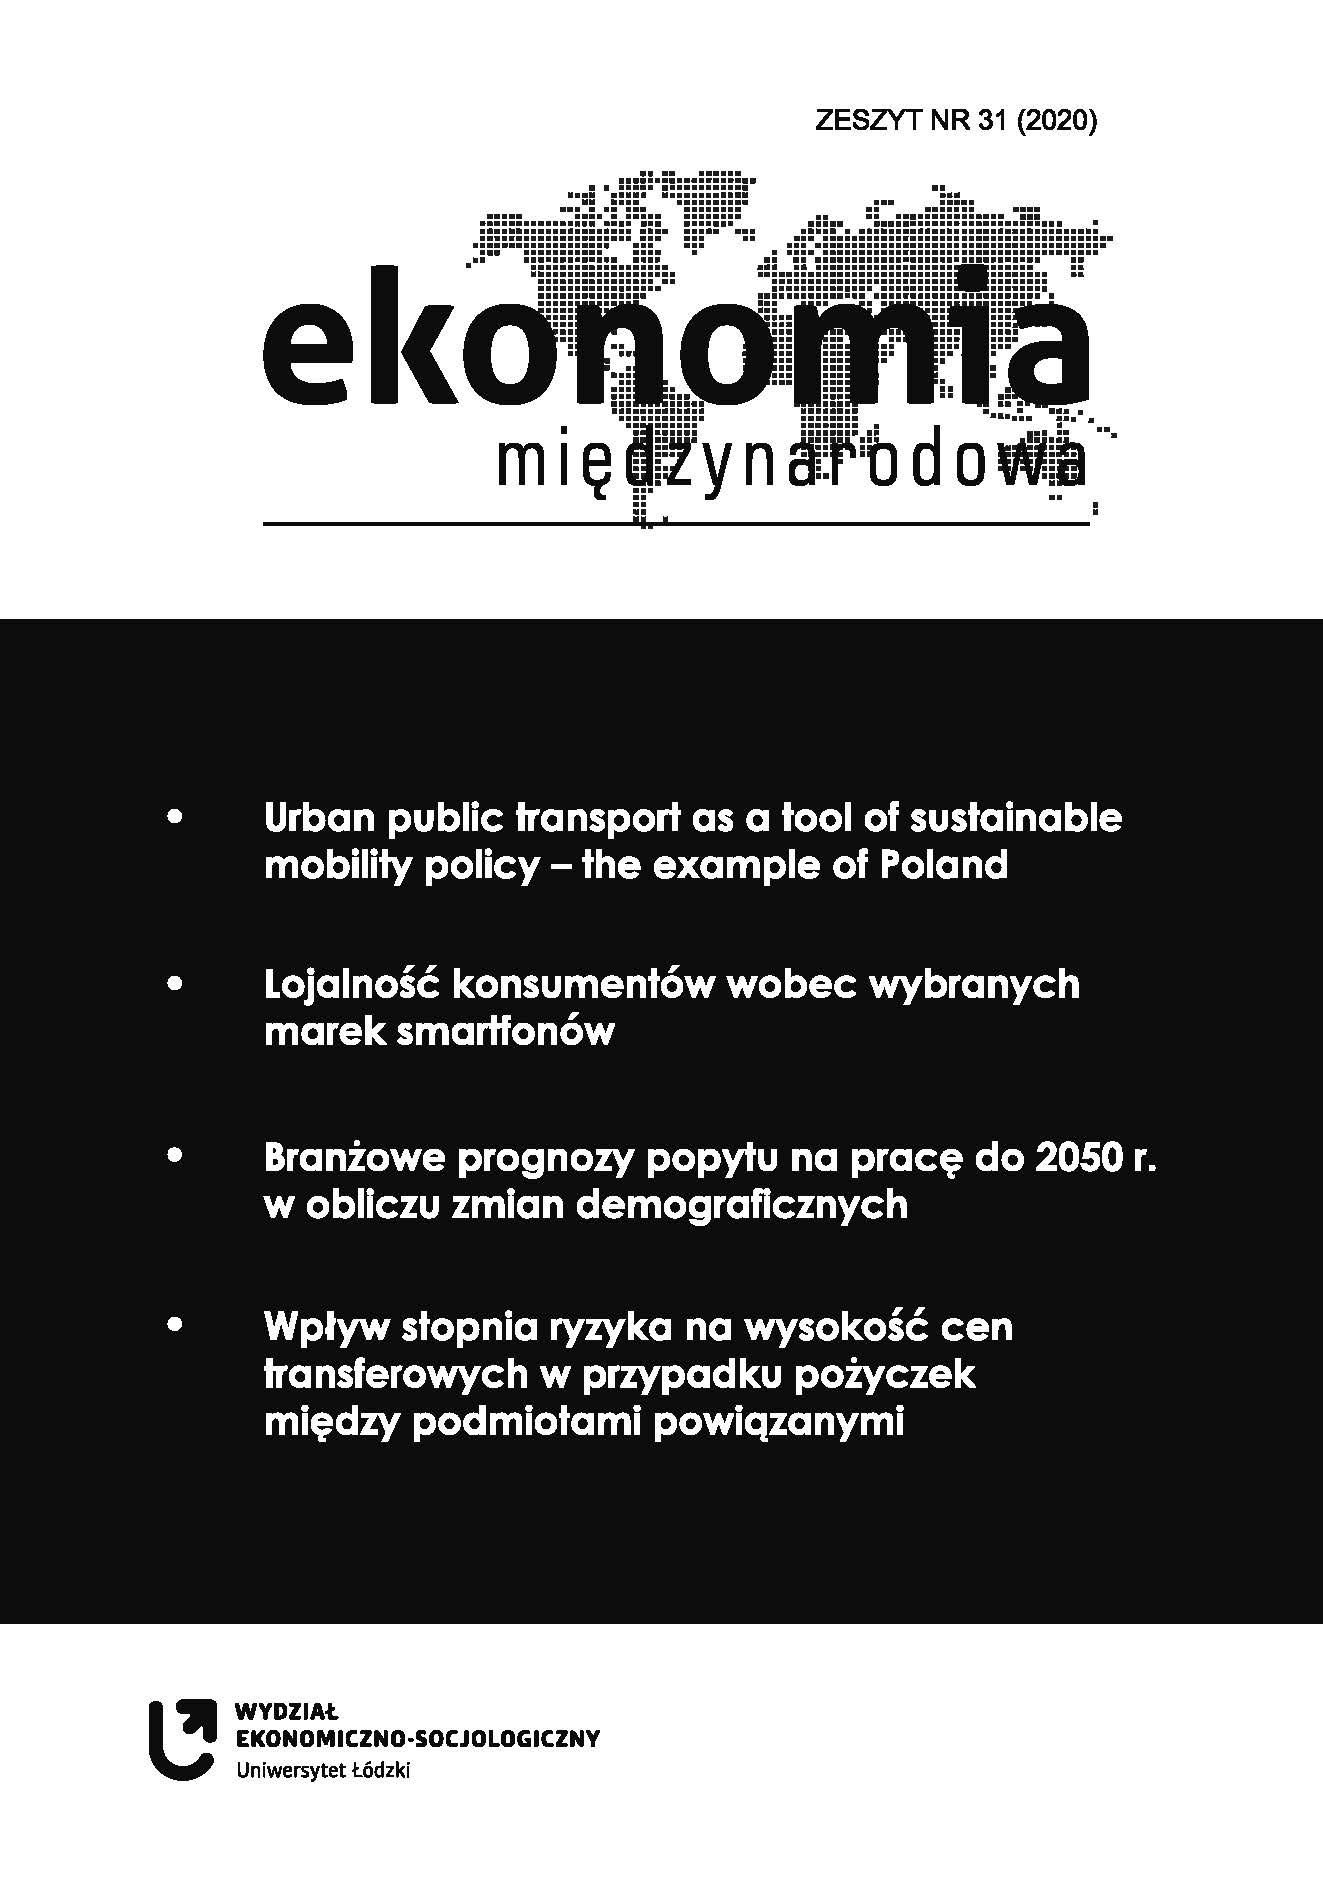 Urban public transport as a tool of sustainable mobility policy – the example of Poland